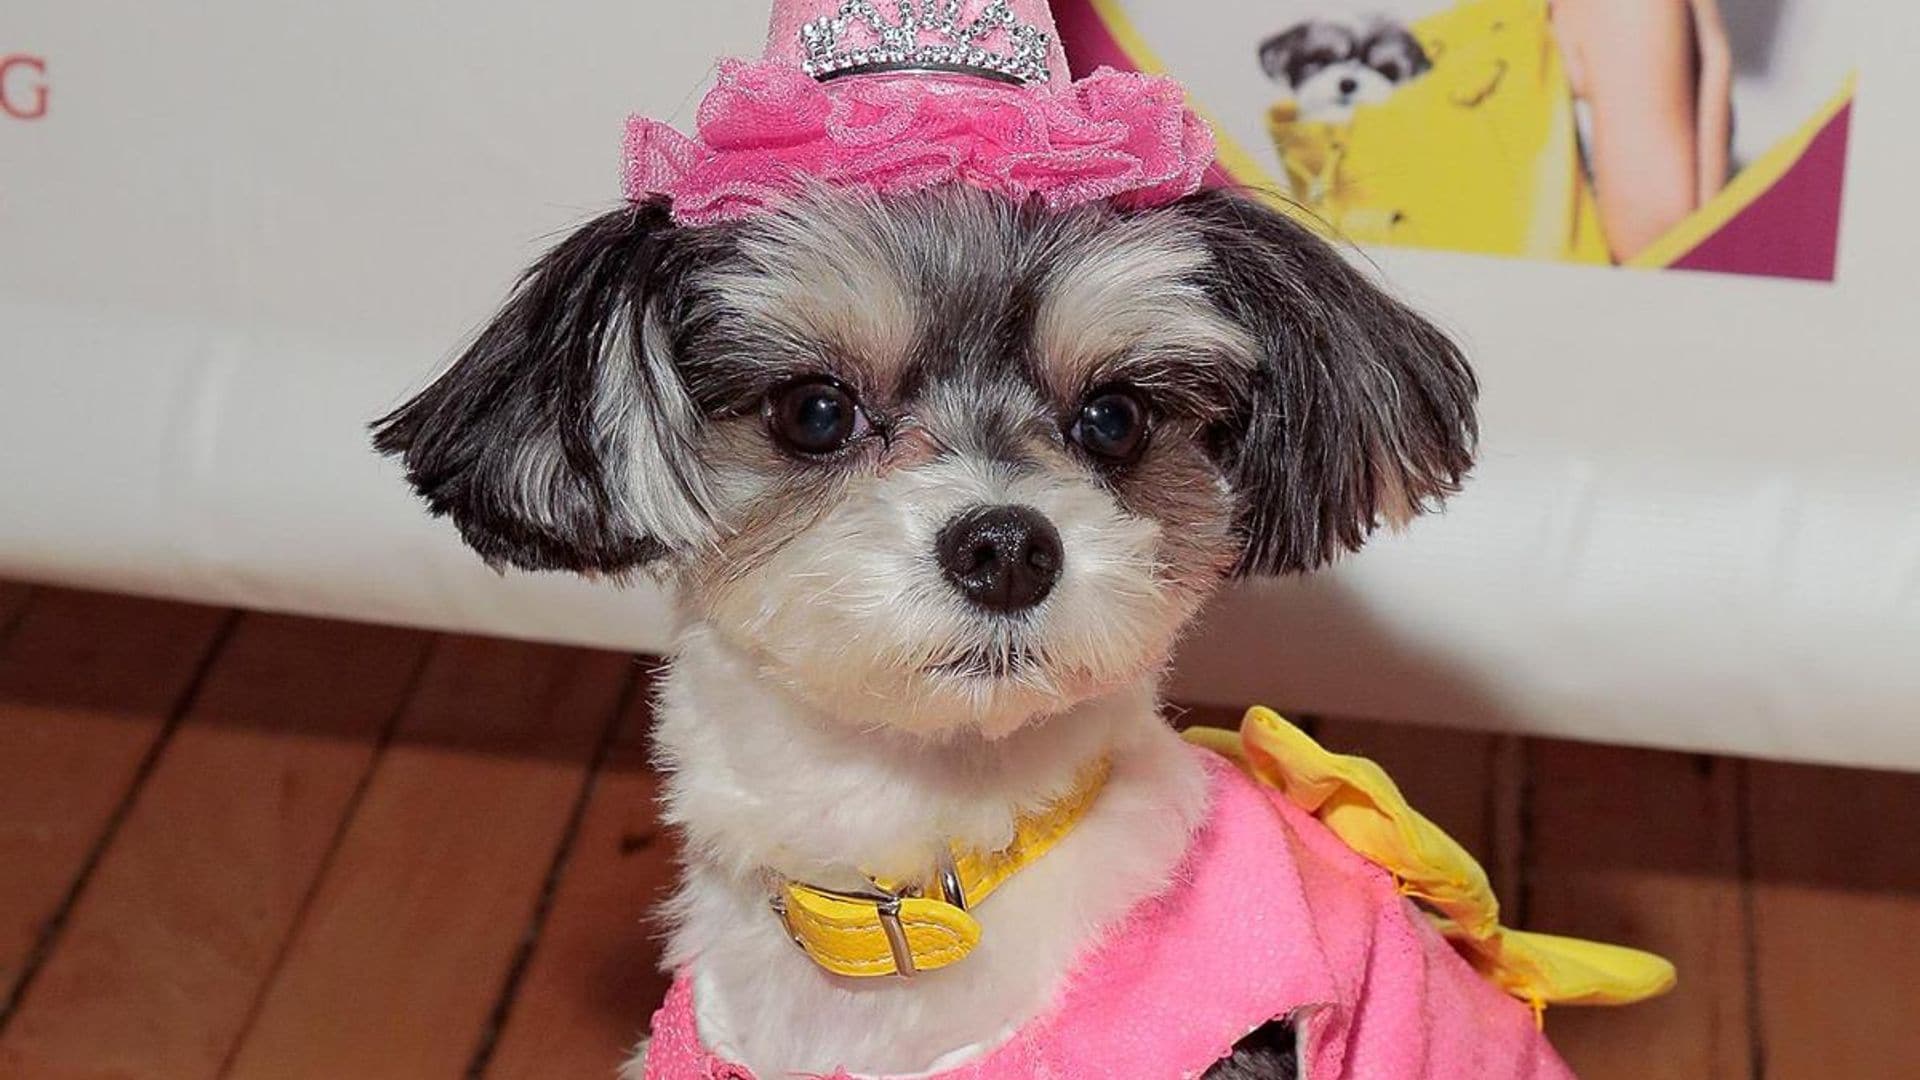 Pet of the week: Watch this dog’s adorable reaction to surprise birthday party